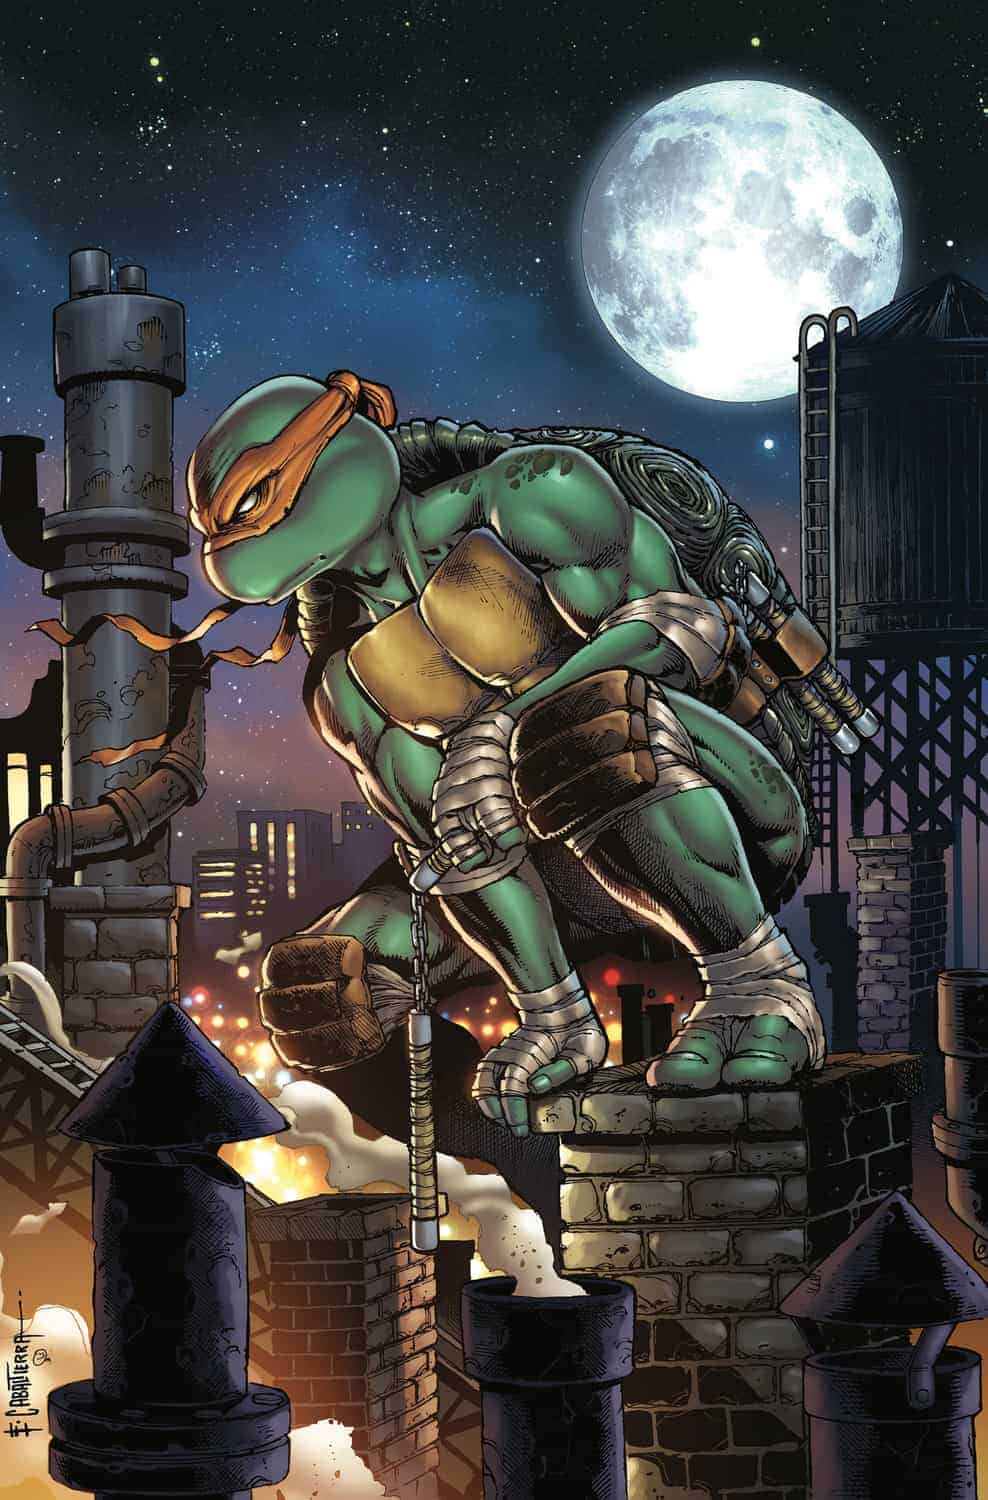 https://static.wikia.nocookie.net/tmnt/images/0/09/Mikebrods.jpg/revision/latest?cb=20200820174734